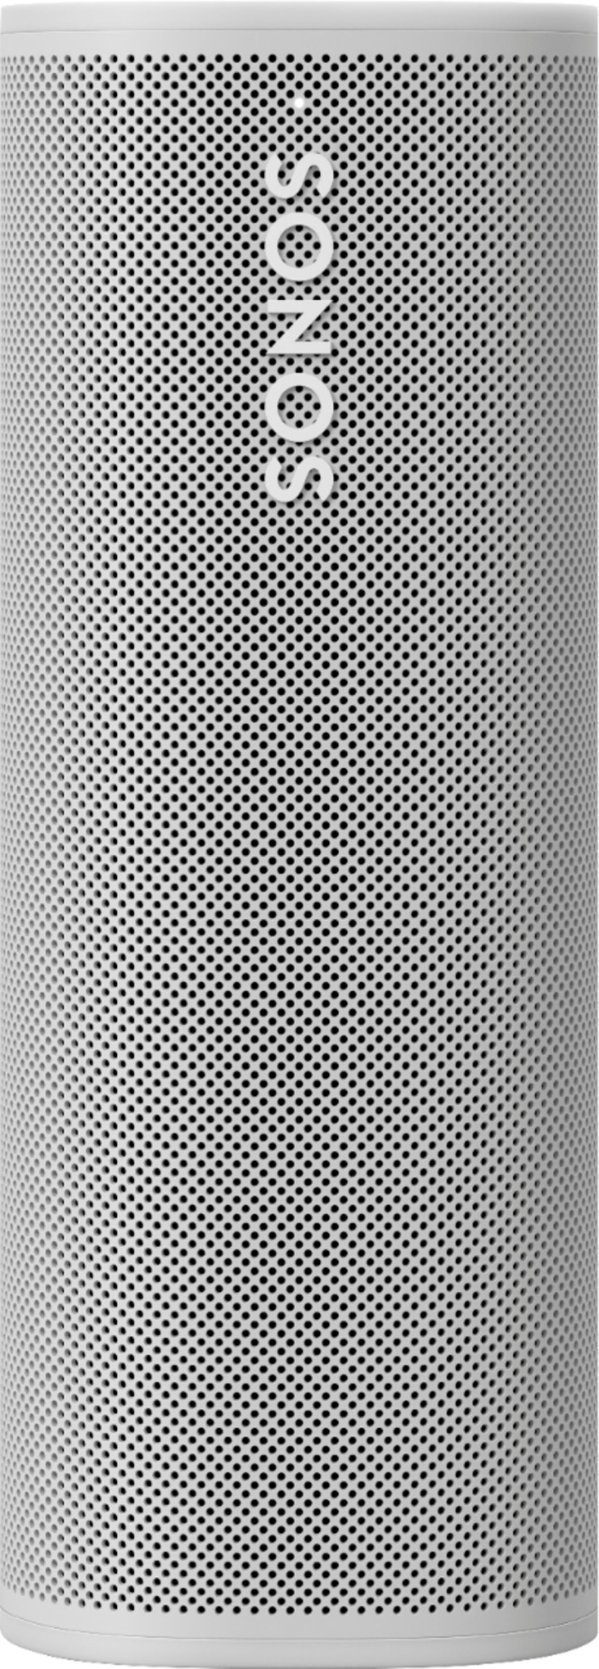 Sonos - Roam Smart Portable Wi-Fi and Bluetooth Speaker with Amazon Alexa and Google Assistant - White-White